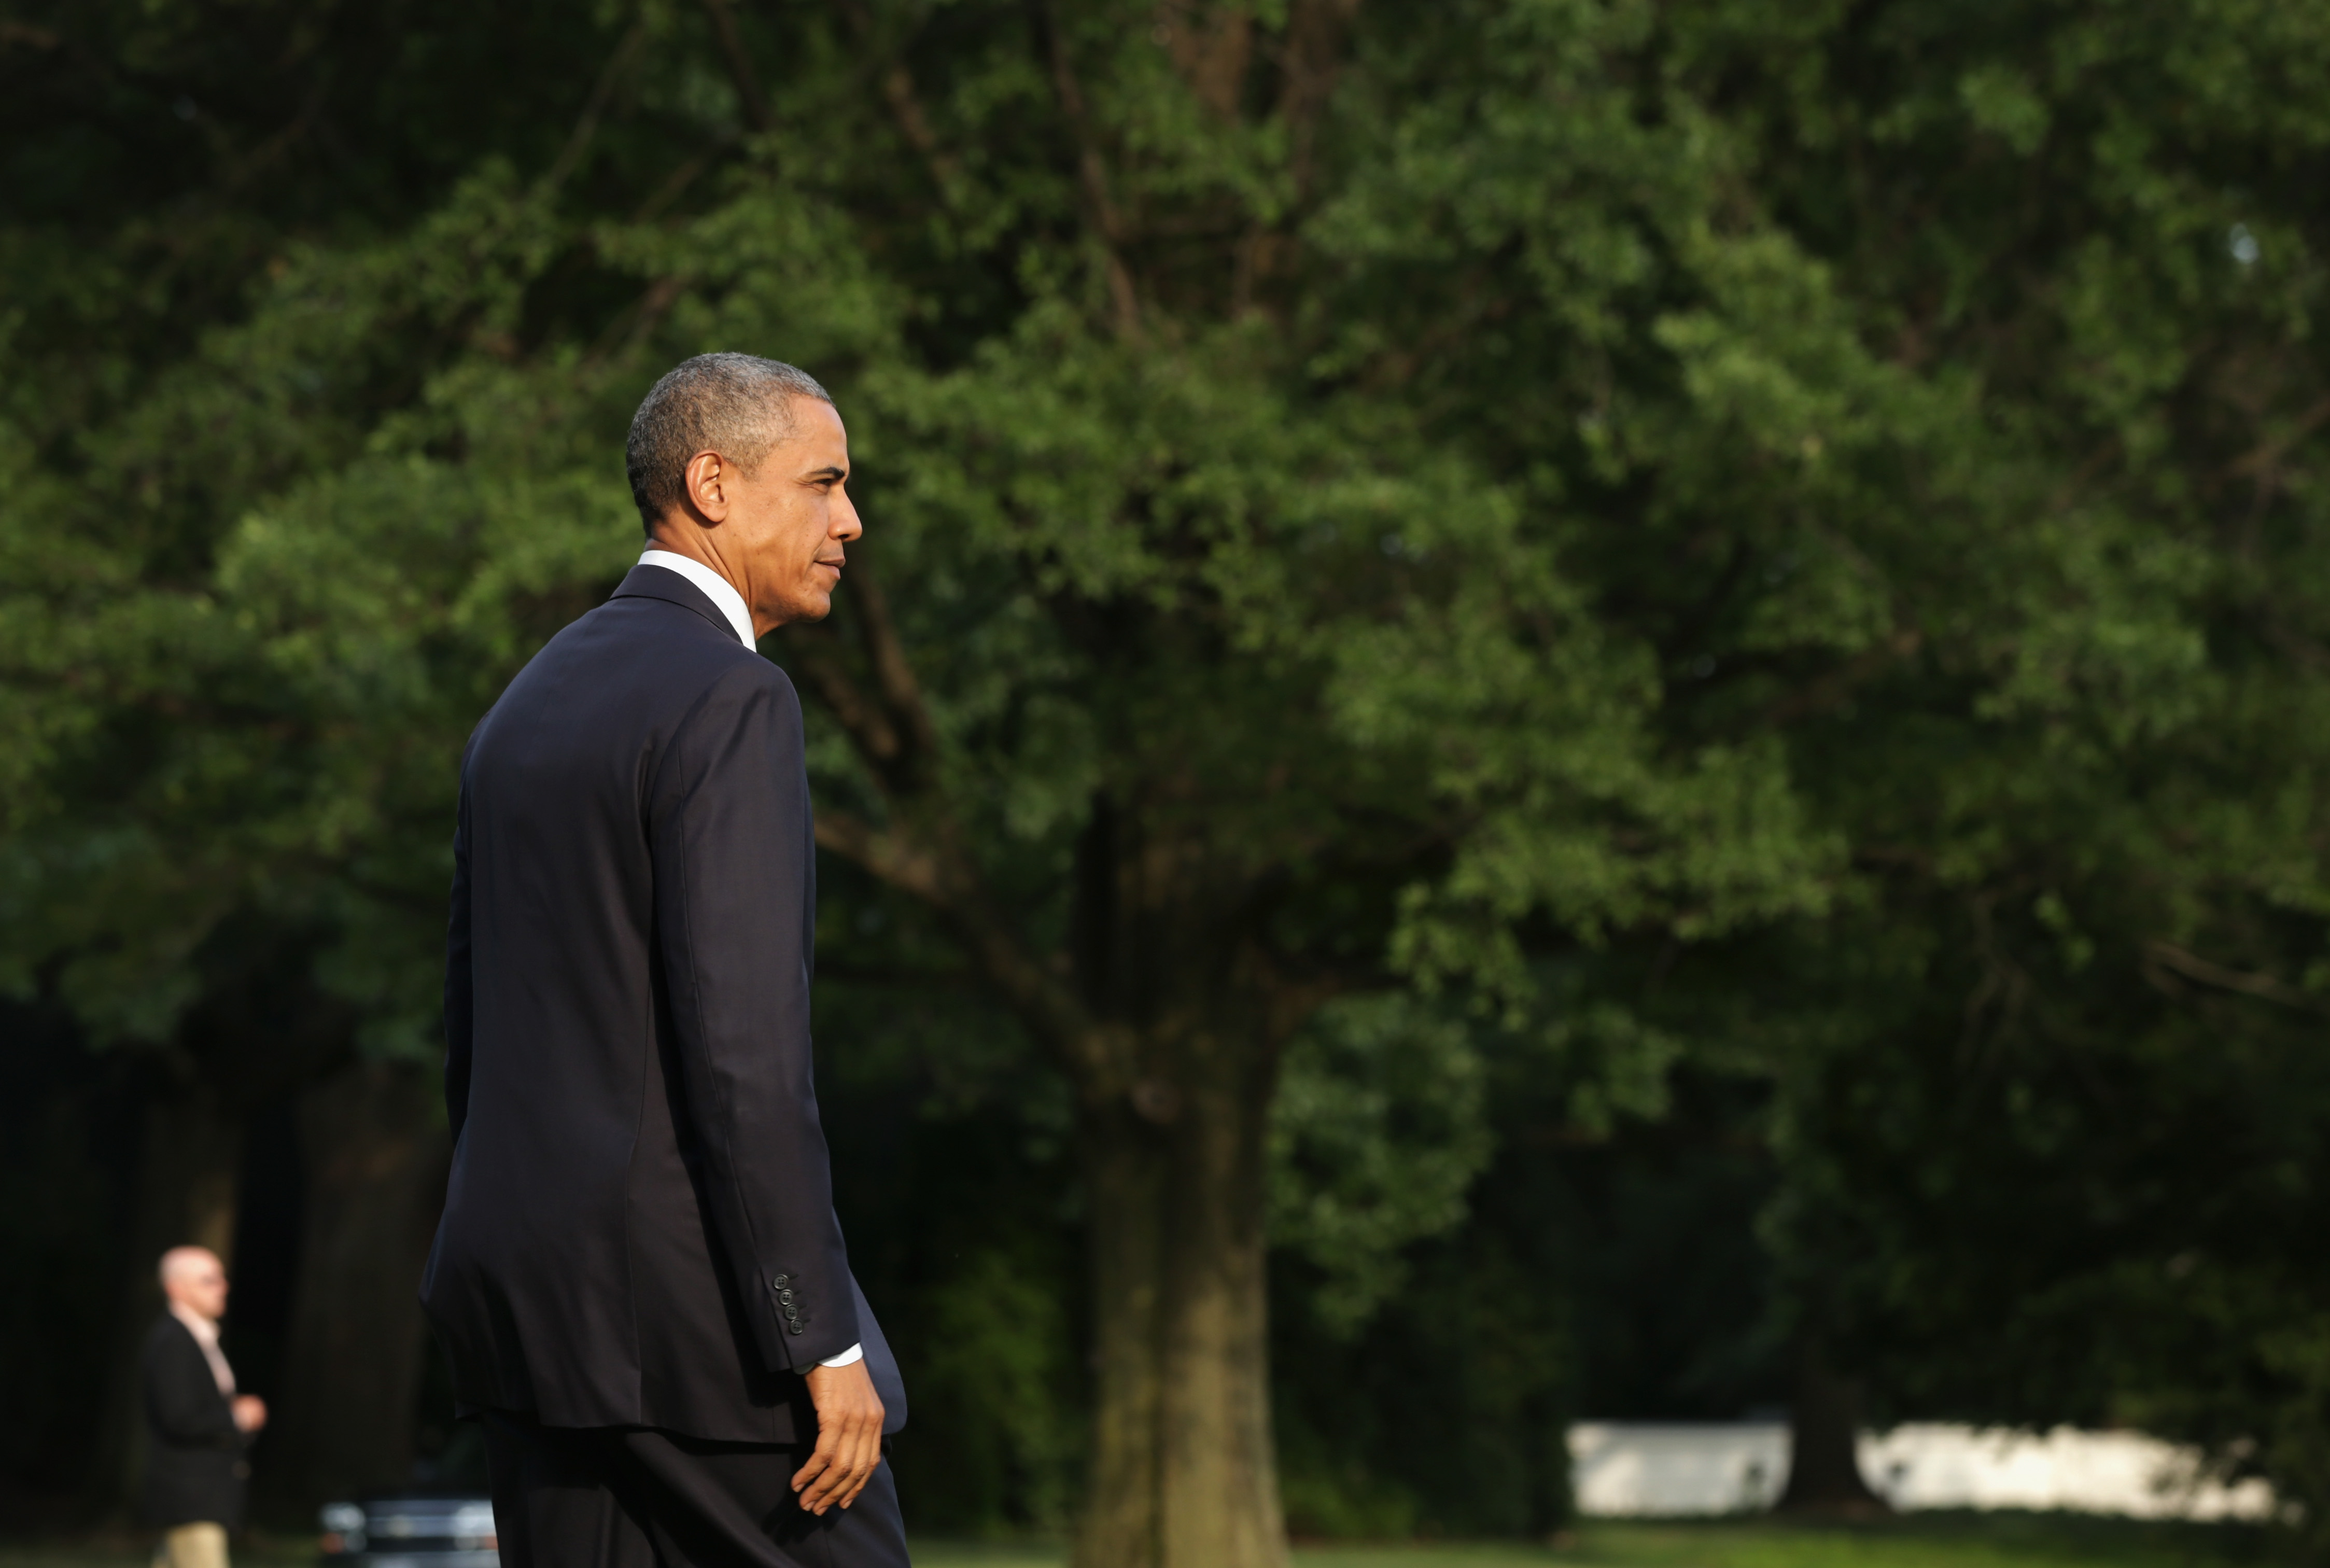 U.S. President Barack Obama walks towards to the Marine One on the South Lawn prior to his departure from the White House July 18, 2014 in Washington, D.C. (Alex Wong—Getty Images)